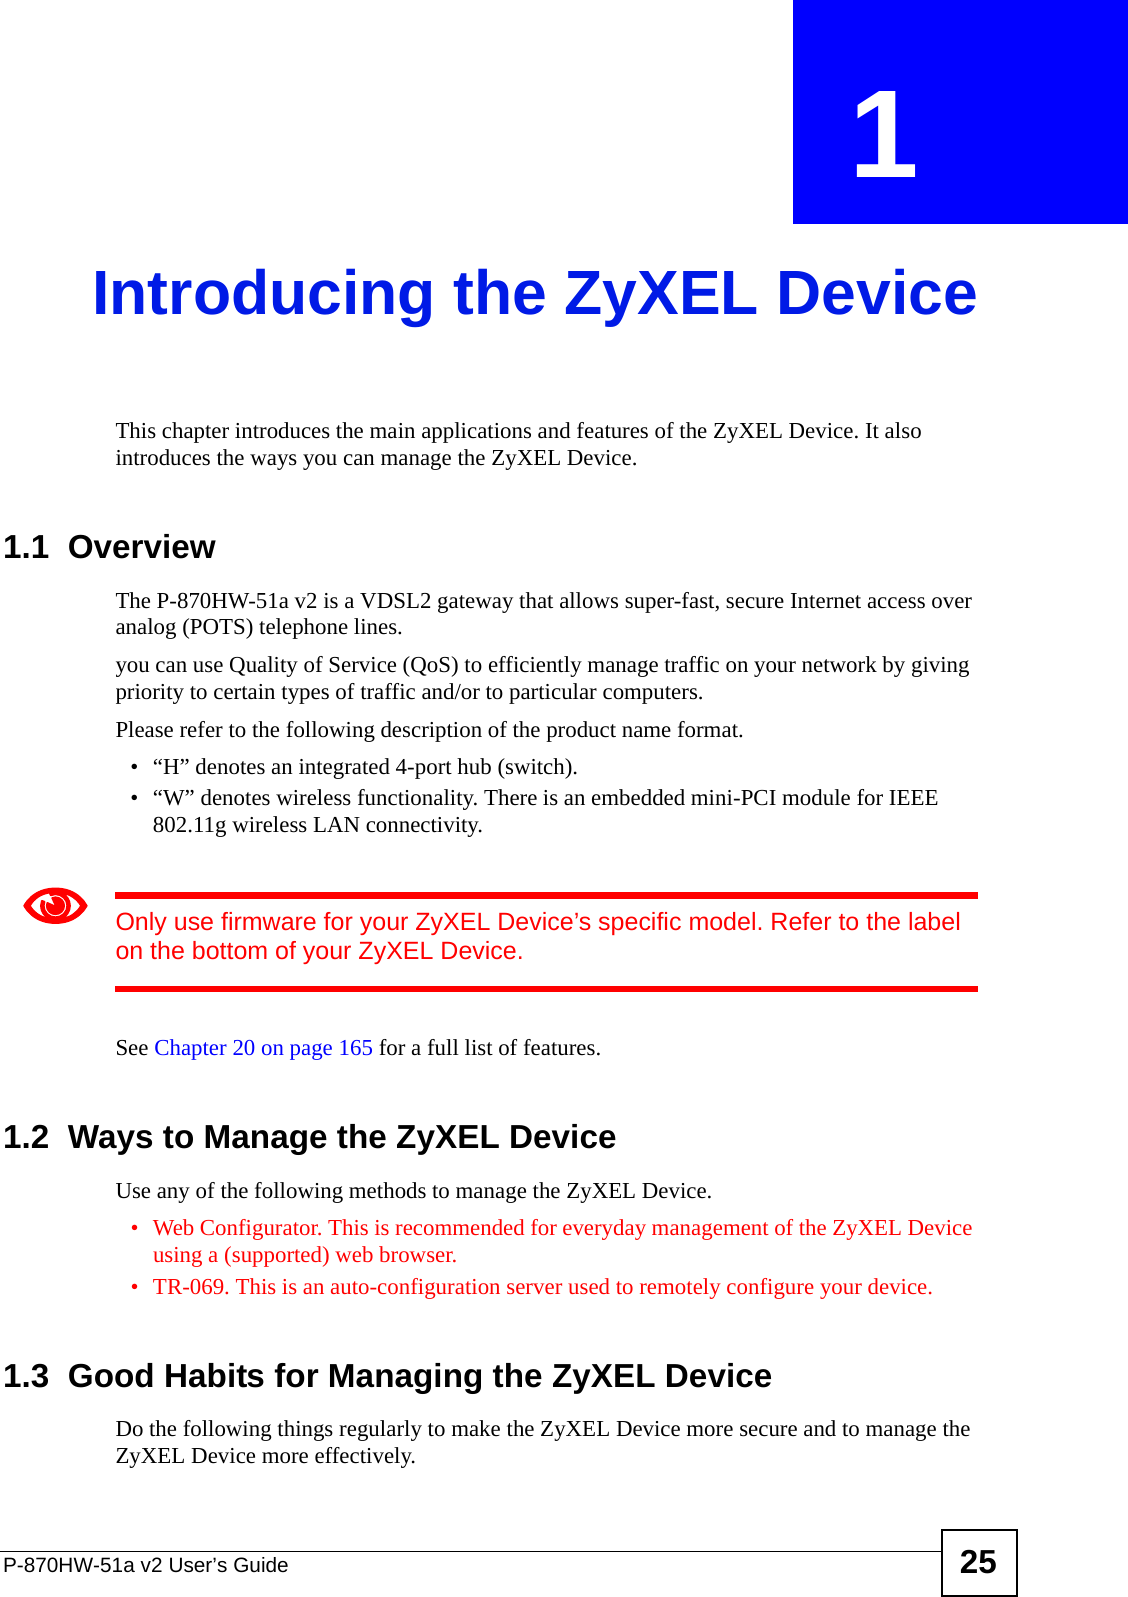 P-870HW-51a v2 User’s Guide 25CHAPTER  1 Introducing the ZyXEL DeviceThis chapter introduces the main applications and features of the ZyXEL Device. It also introduces the ways you can manage the ZyXEL Device.1.1  OverviewThe P-870HW-51a v2 is a VDSL2 gateway that allows super-fast, secure Internet access over analog (POTS) telephone lines. you can use Quality of Service (QoS) to efficiently manage traffic on your network by giving priority to certain types of traffic and/or to particular computers.Please refer to the following description of the product name format.• “H” denotes an integrated 4-port hub (switch).• “W” denotes wireless functionality. There is an embedded mini-PCI module for IEEE 802.11g wireless LAN connectivity. 1Only use firmware for your ZyXEL Device’s specific model. Refer to the label on the bottom of your ZyXEL Device.See Chapter 20 on page 165 for a full list of features.1.2  Ways to Manage the ZyXEL DeviceUse any of the following methods to manage the ZyXEL Device.• Web Configurator. This is recommended for everyday management of the ZyXEL Device using a (supported) web browser.• TR-069. This is an auto-configuration server used to remotely configure your device.1.3  Good Habits for Managing the ZyXEL DeviceDo the following things regularly to make the ZyXEL Device more secure and to manage the ZyXEL Device more effectively.